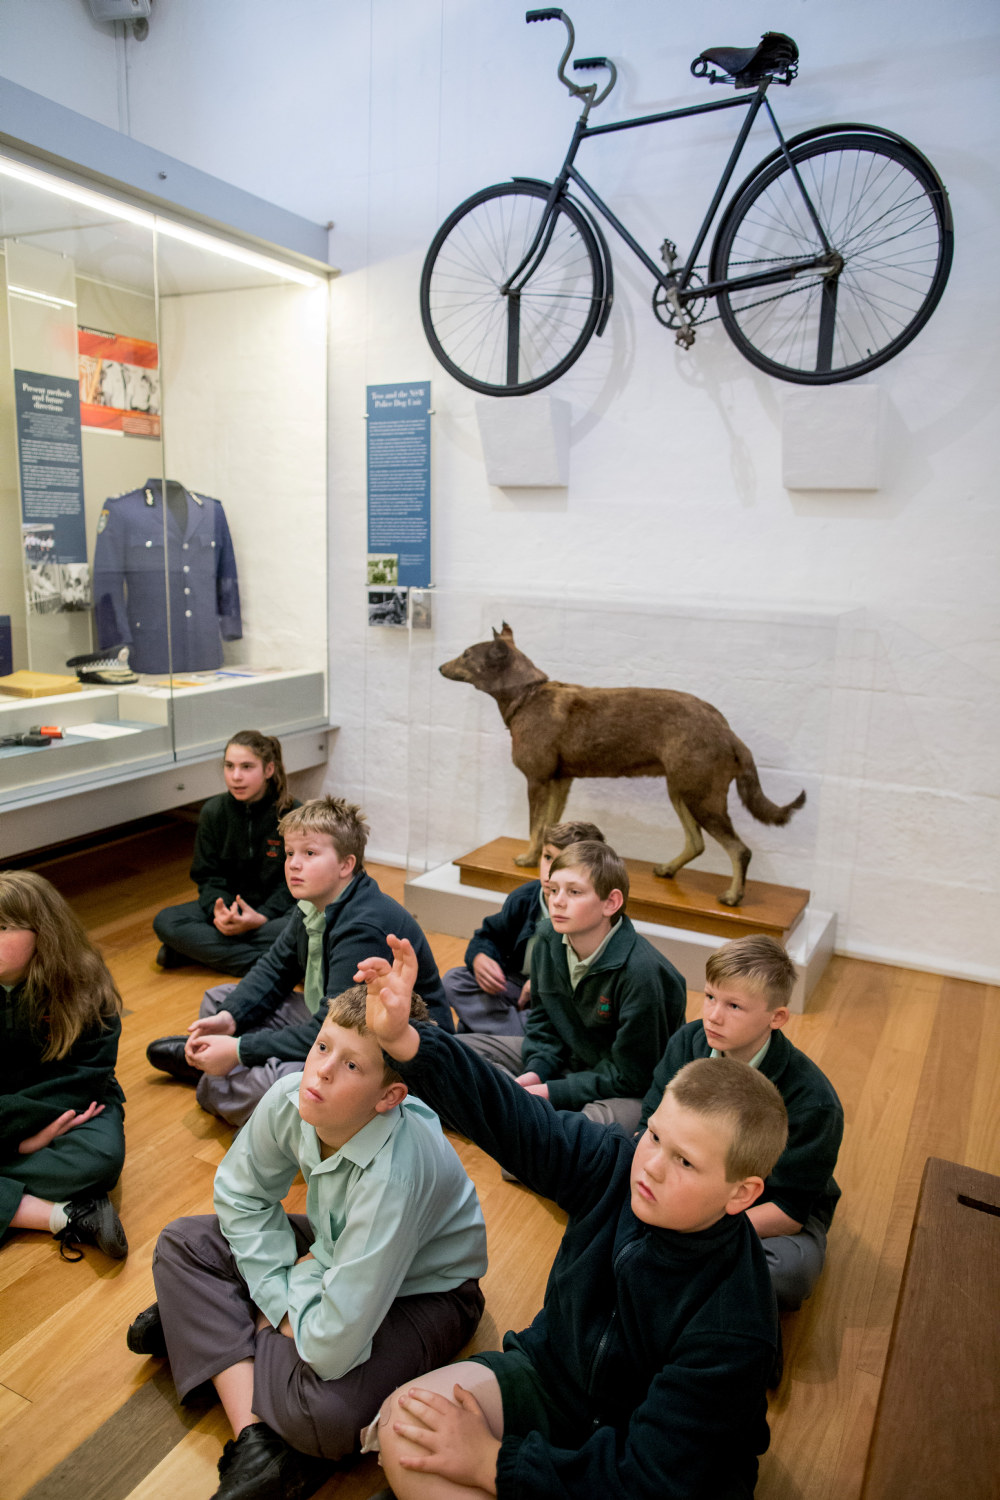 Students participating in the Bailed Up! program at the Justice and Police Museum seated in front of Tess, the first NSW Police Dog, who died in 1942